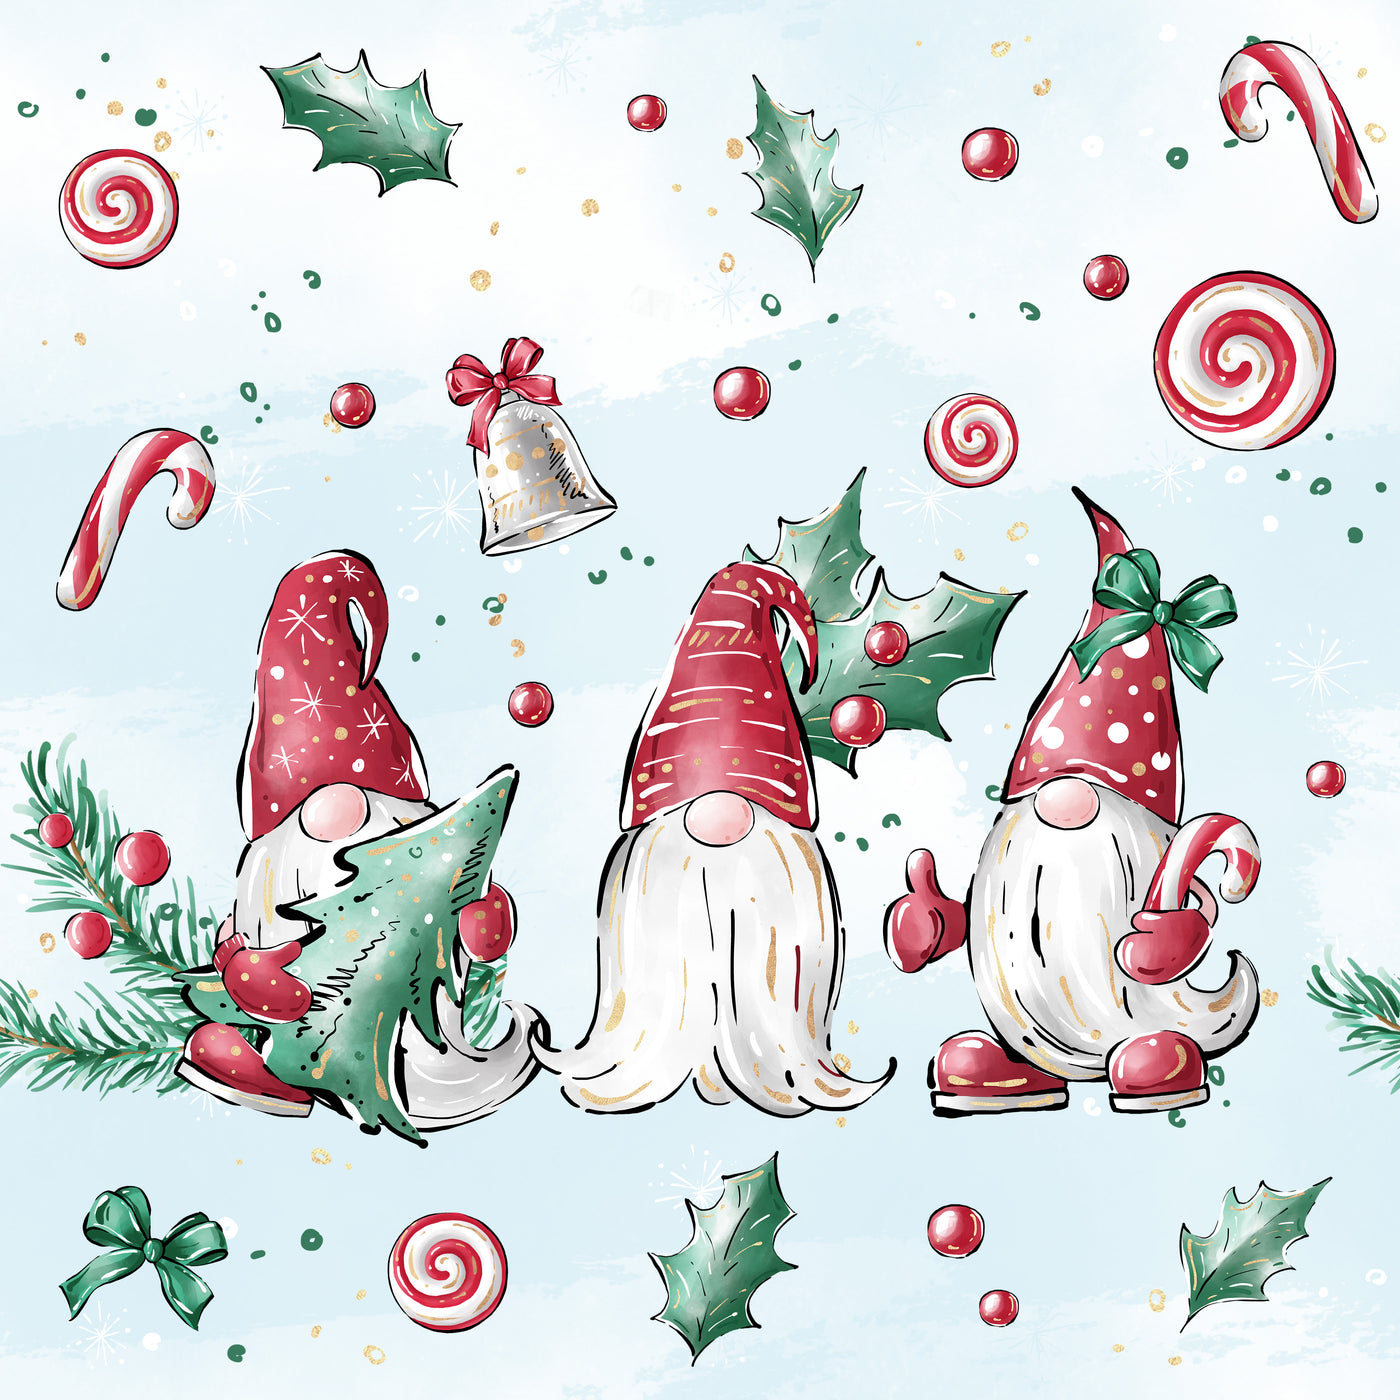 Adhesive Patterned Vinyl - Christmas Gnome 8